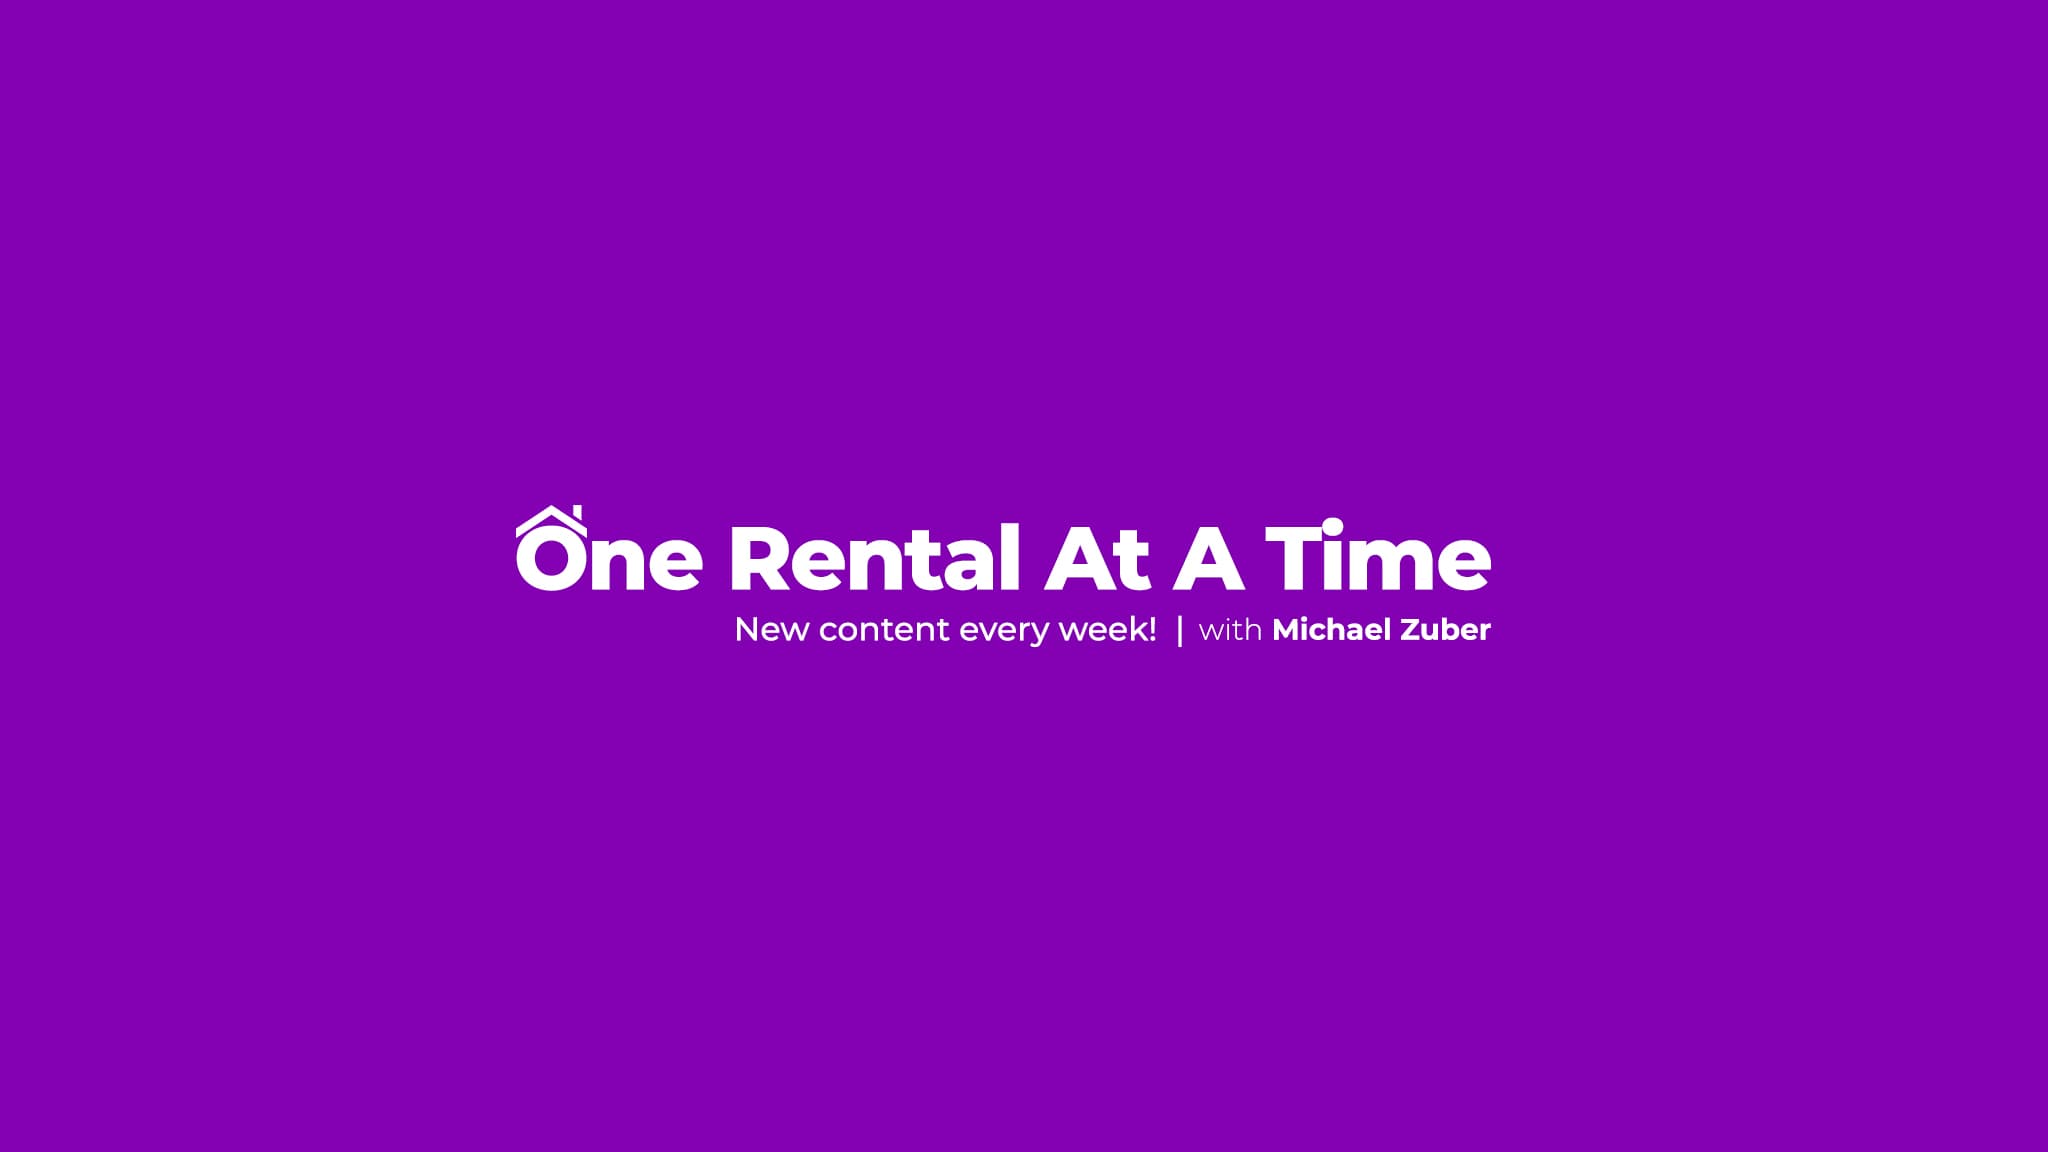 One Rental at a Time: The Journey to Financial Independence through Real Estate